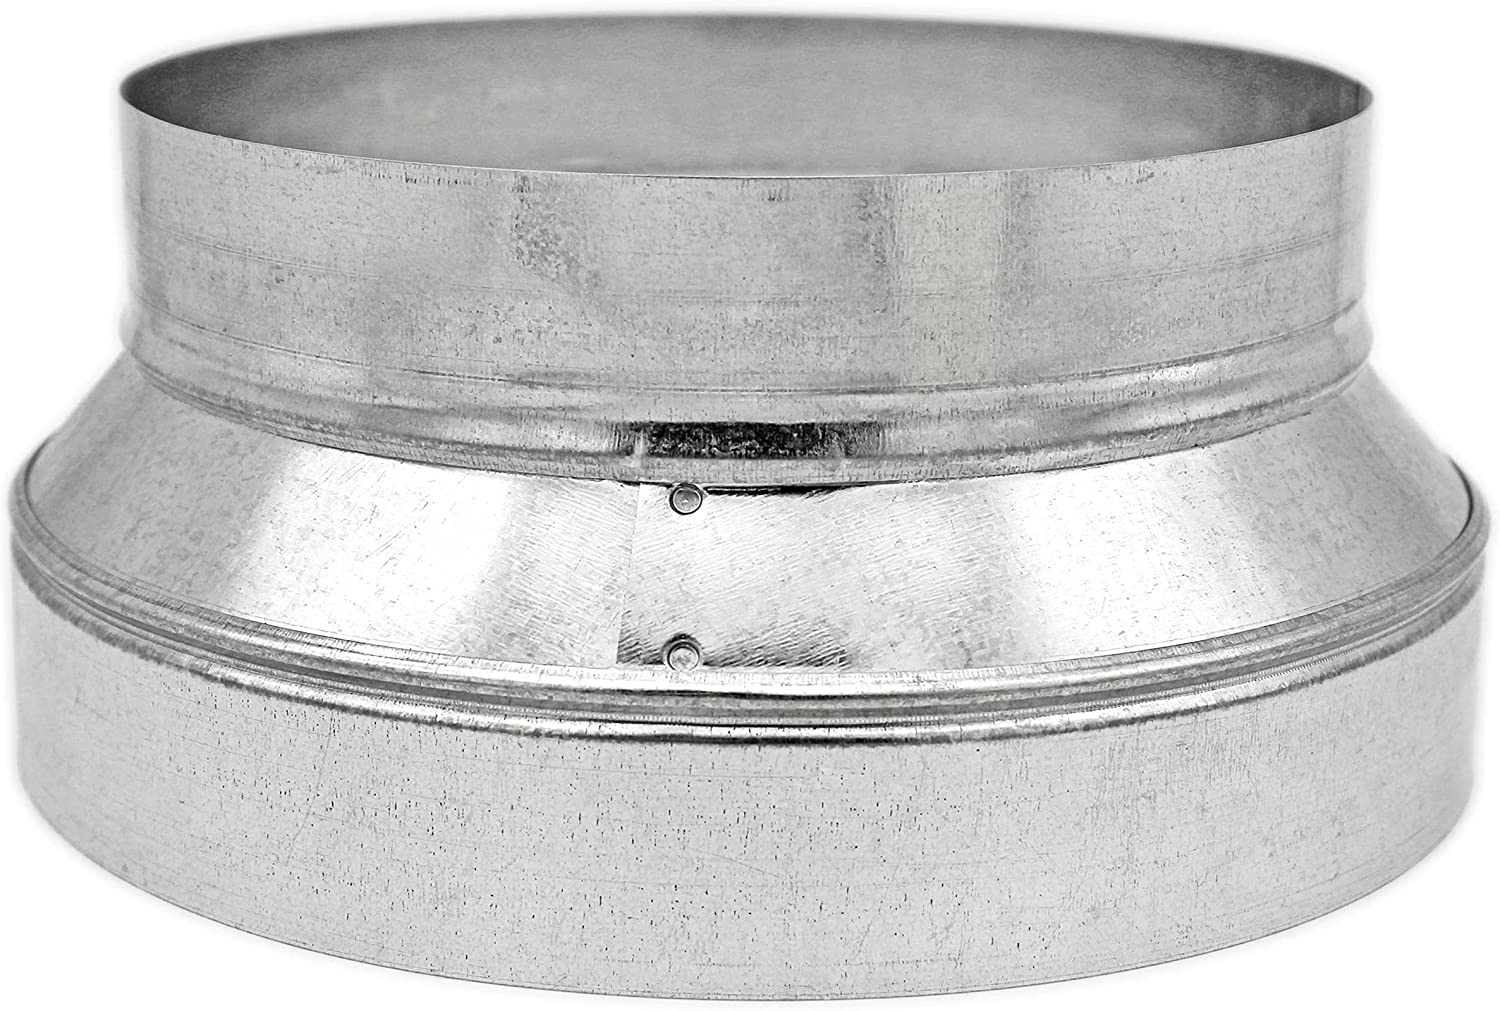 HVAC Premium Round Metal Pipe Reducer & Increaser | 6" to 3" HVAC Duct Reducer or Increaser 30g Gauge | Galvanized Sheet Metal Ducting Connector is Compatible with Duct 3"